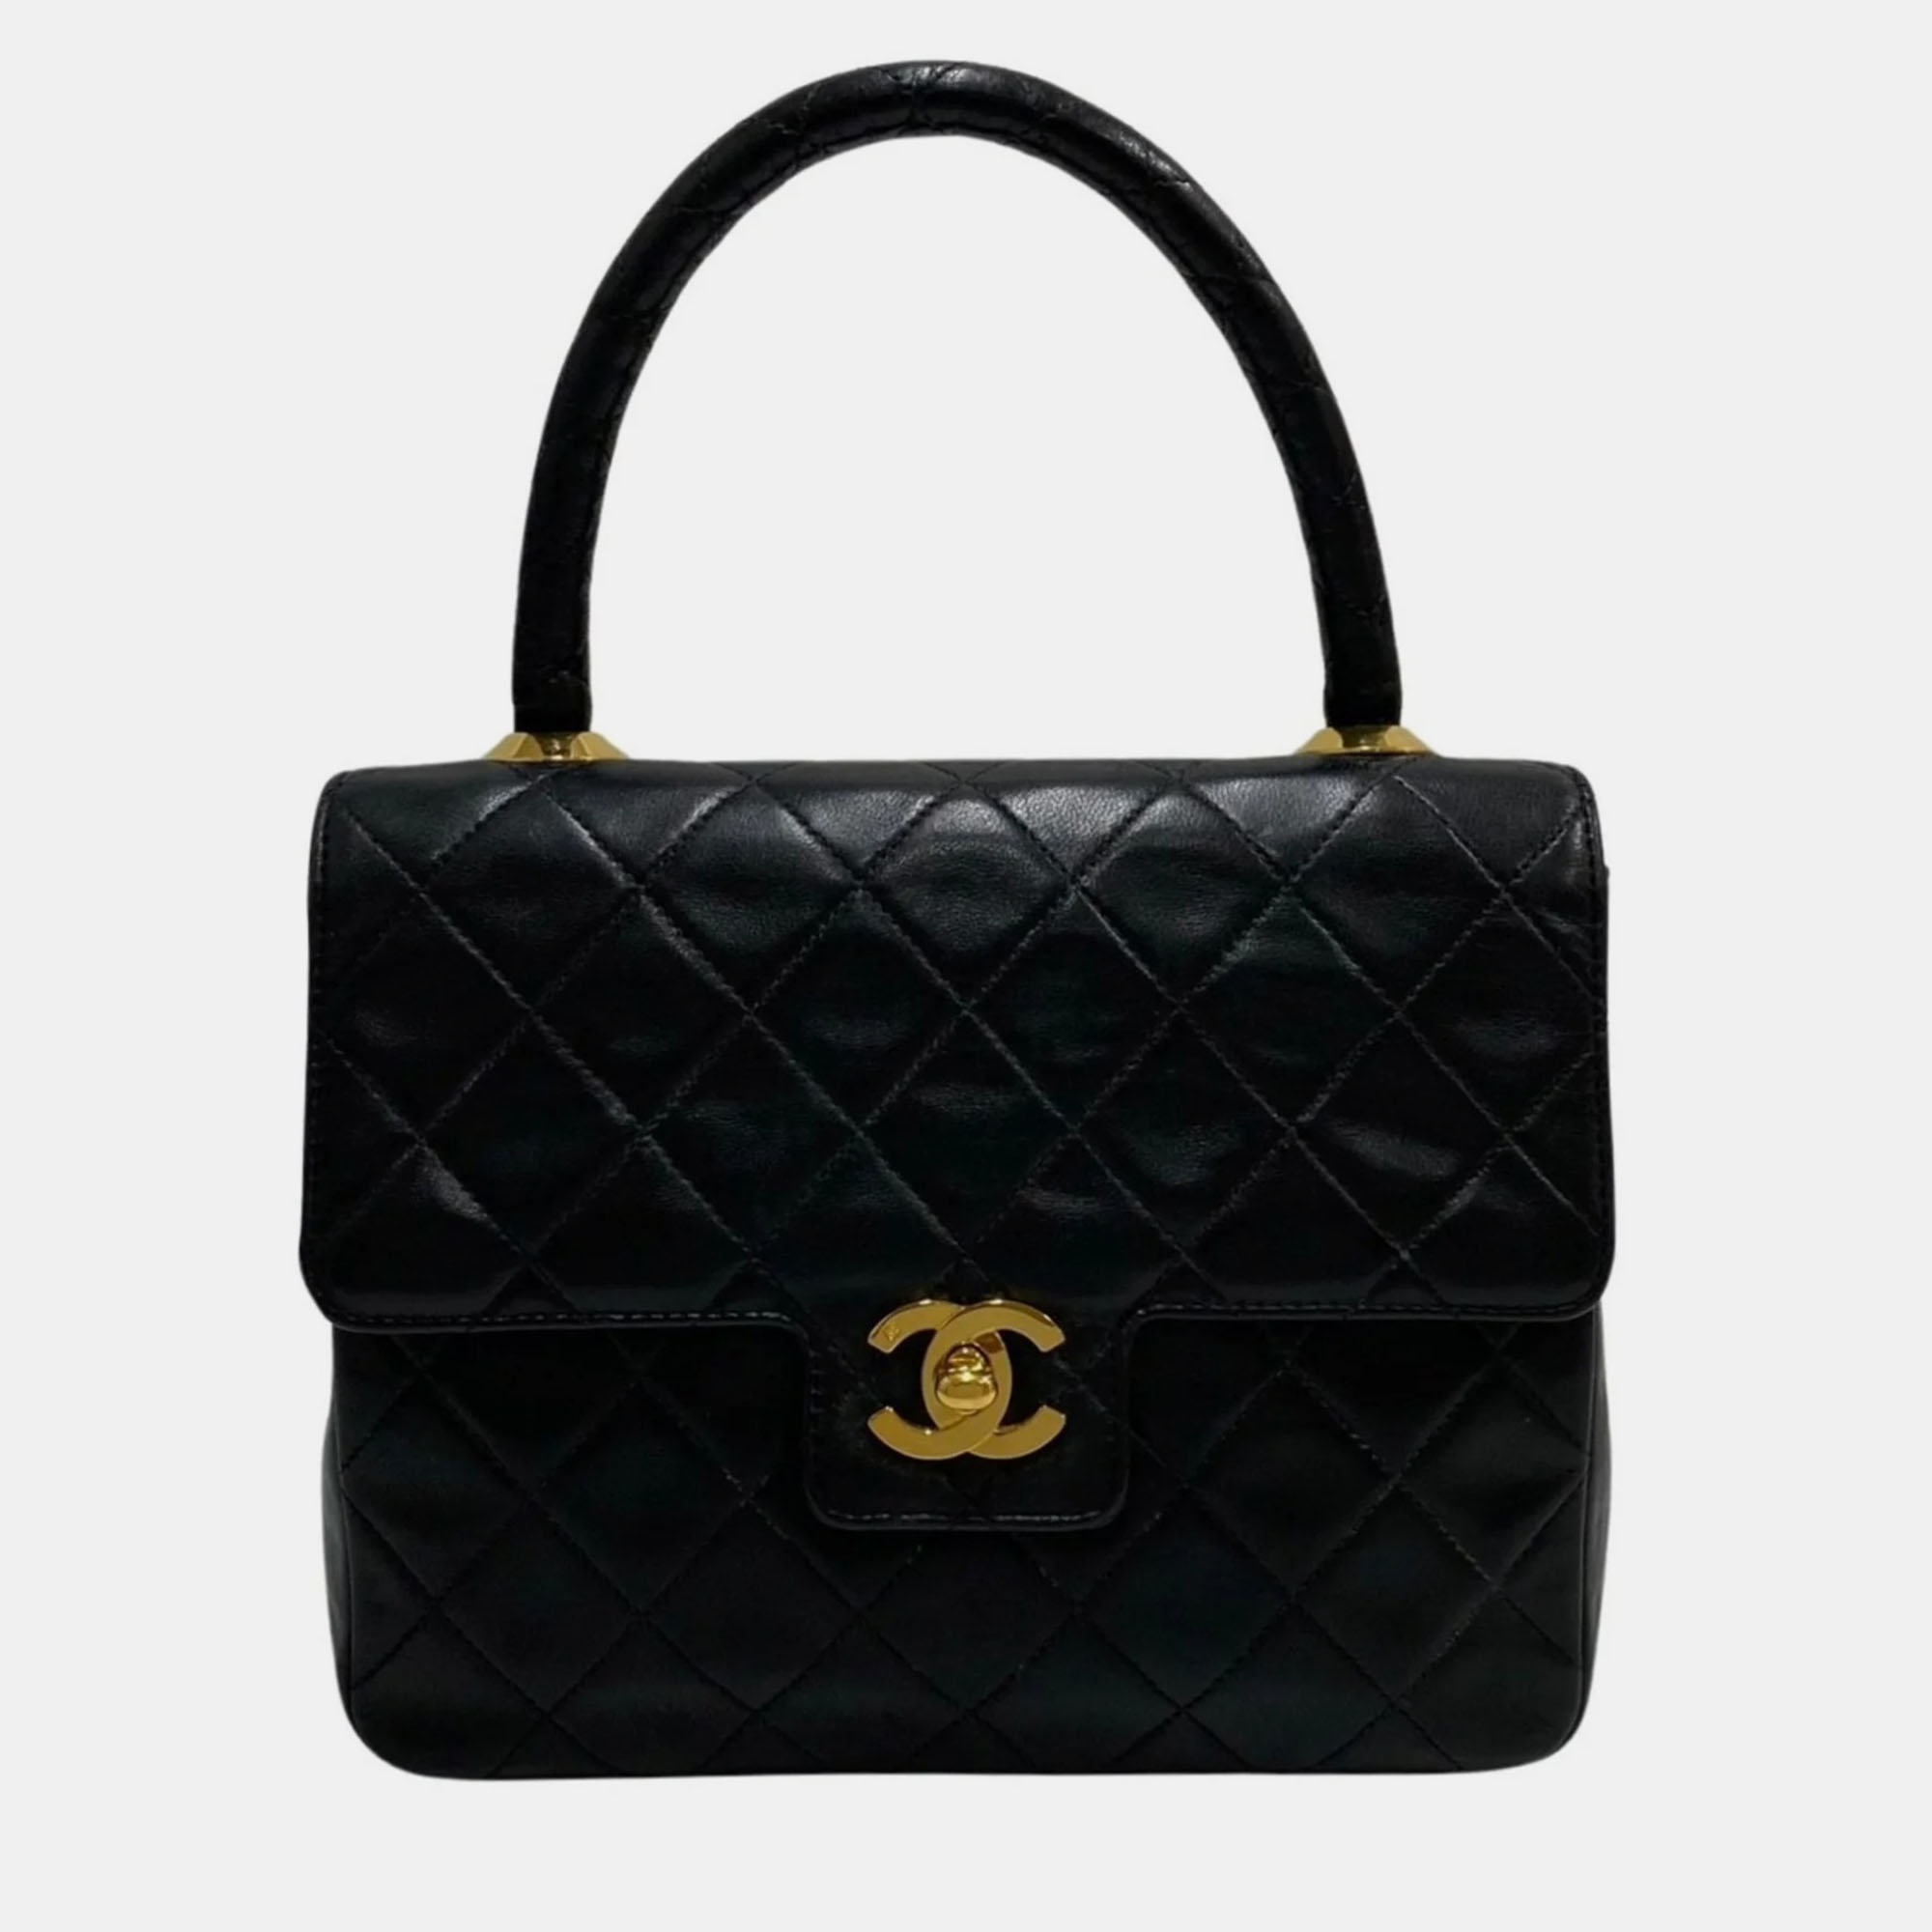 Chanel black leather small trendy cc bag